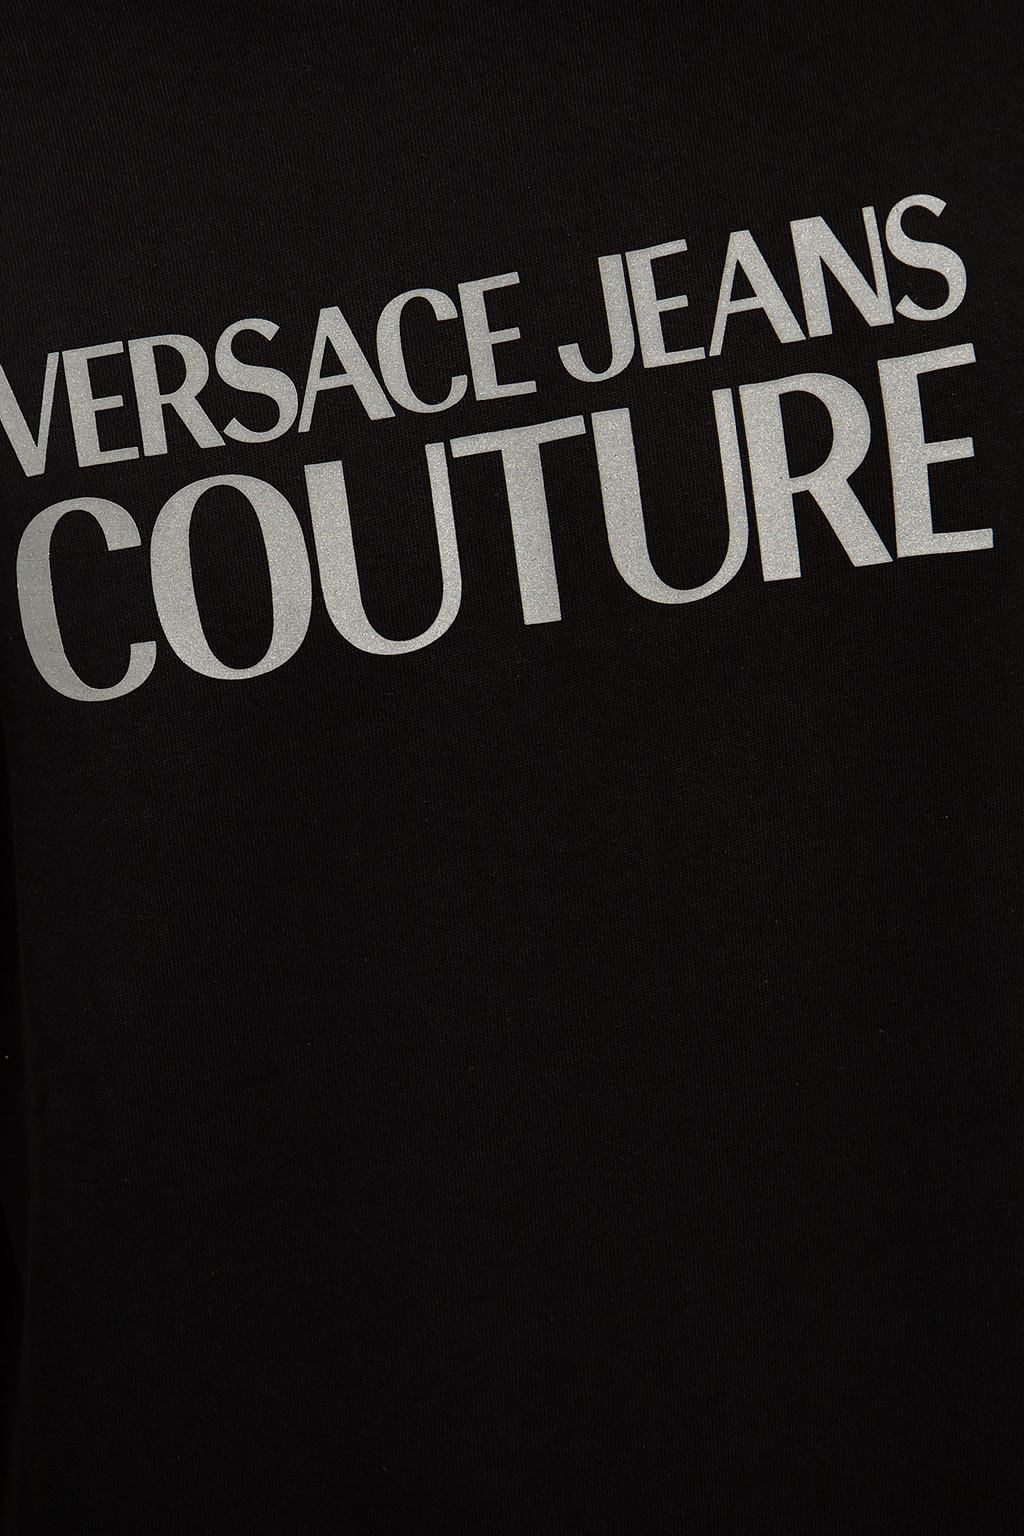 Versace Jeans Couture All Blacks Lifestyle T Shirt Mens